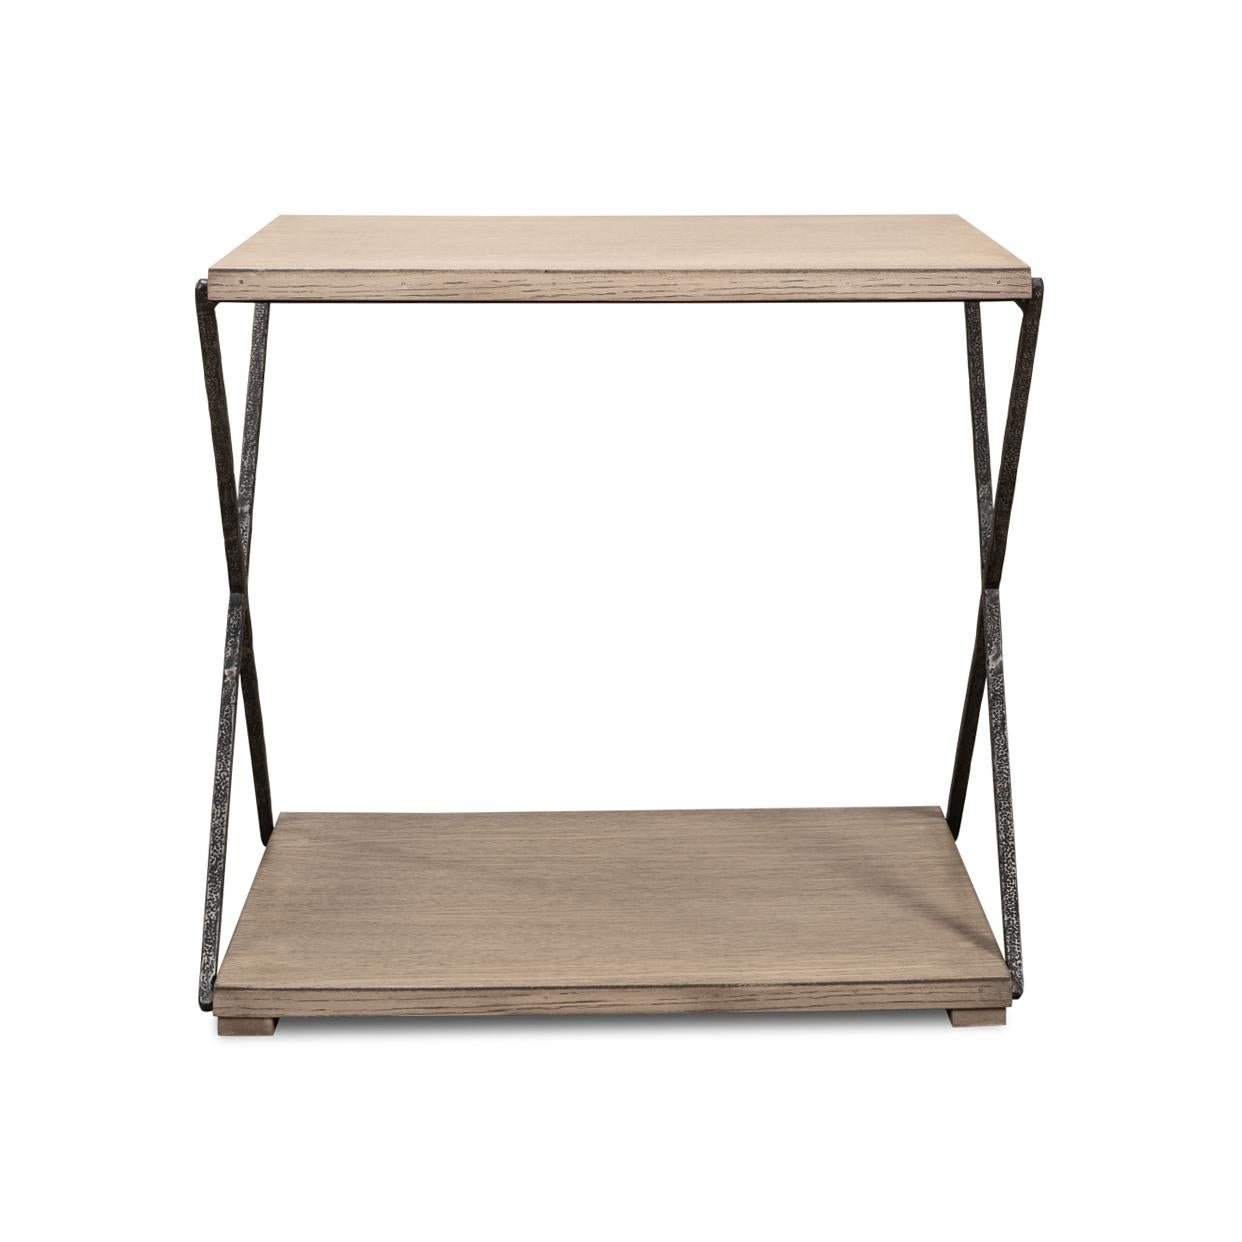 A blend of sophistication and durability to enhance your living space!

Crafted with a robust hand-forged iron frame, this side table features an 